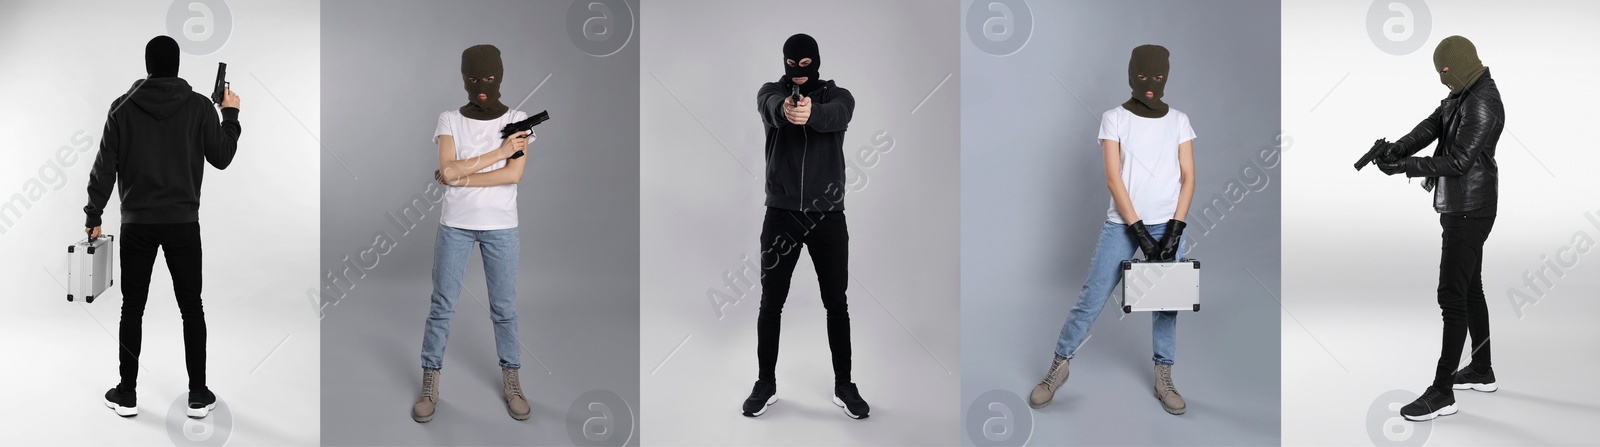 Image of Collage with photos of people in balaclavas on grey background